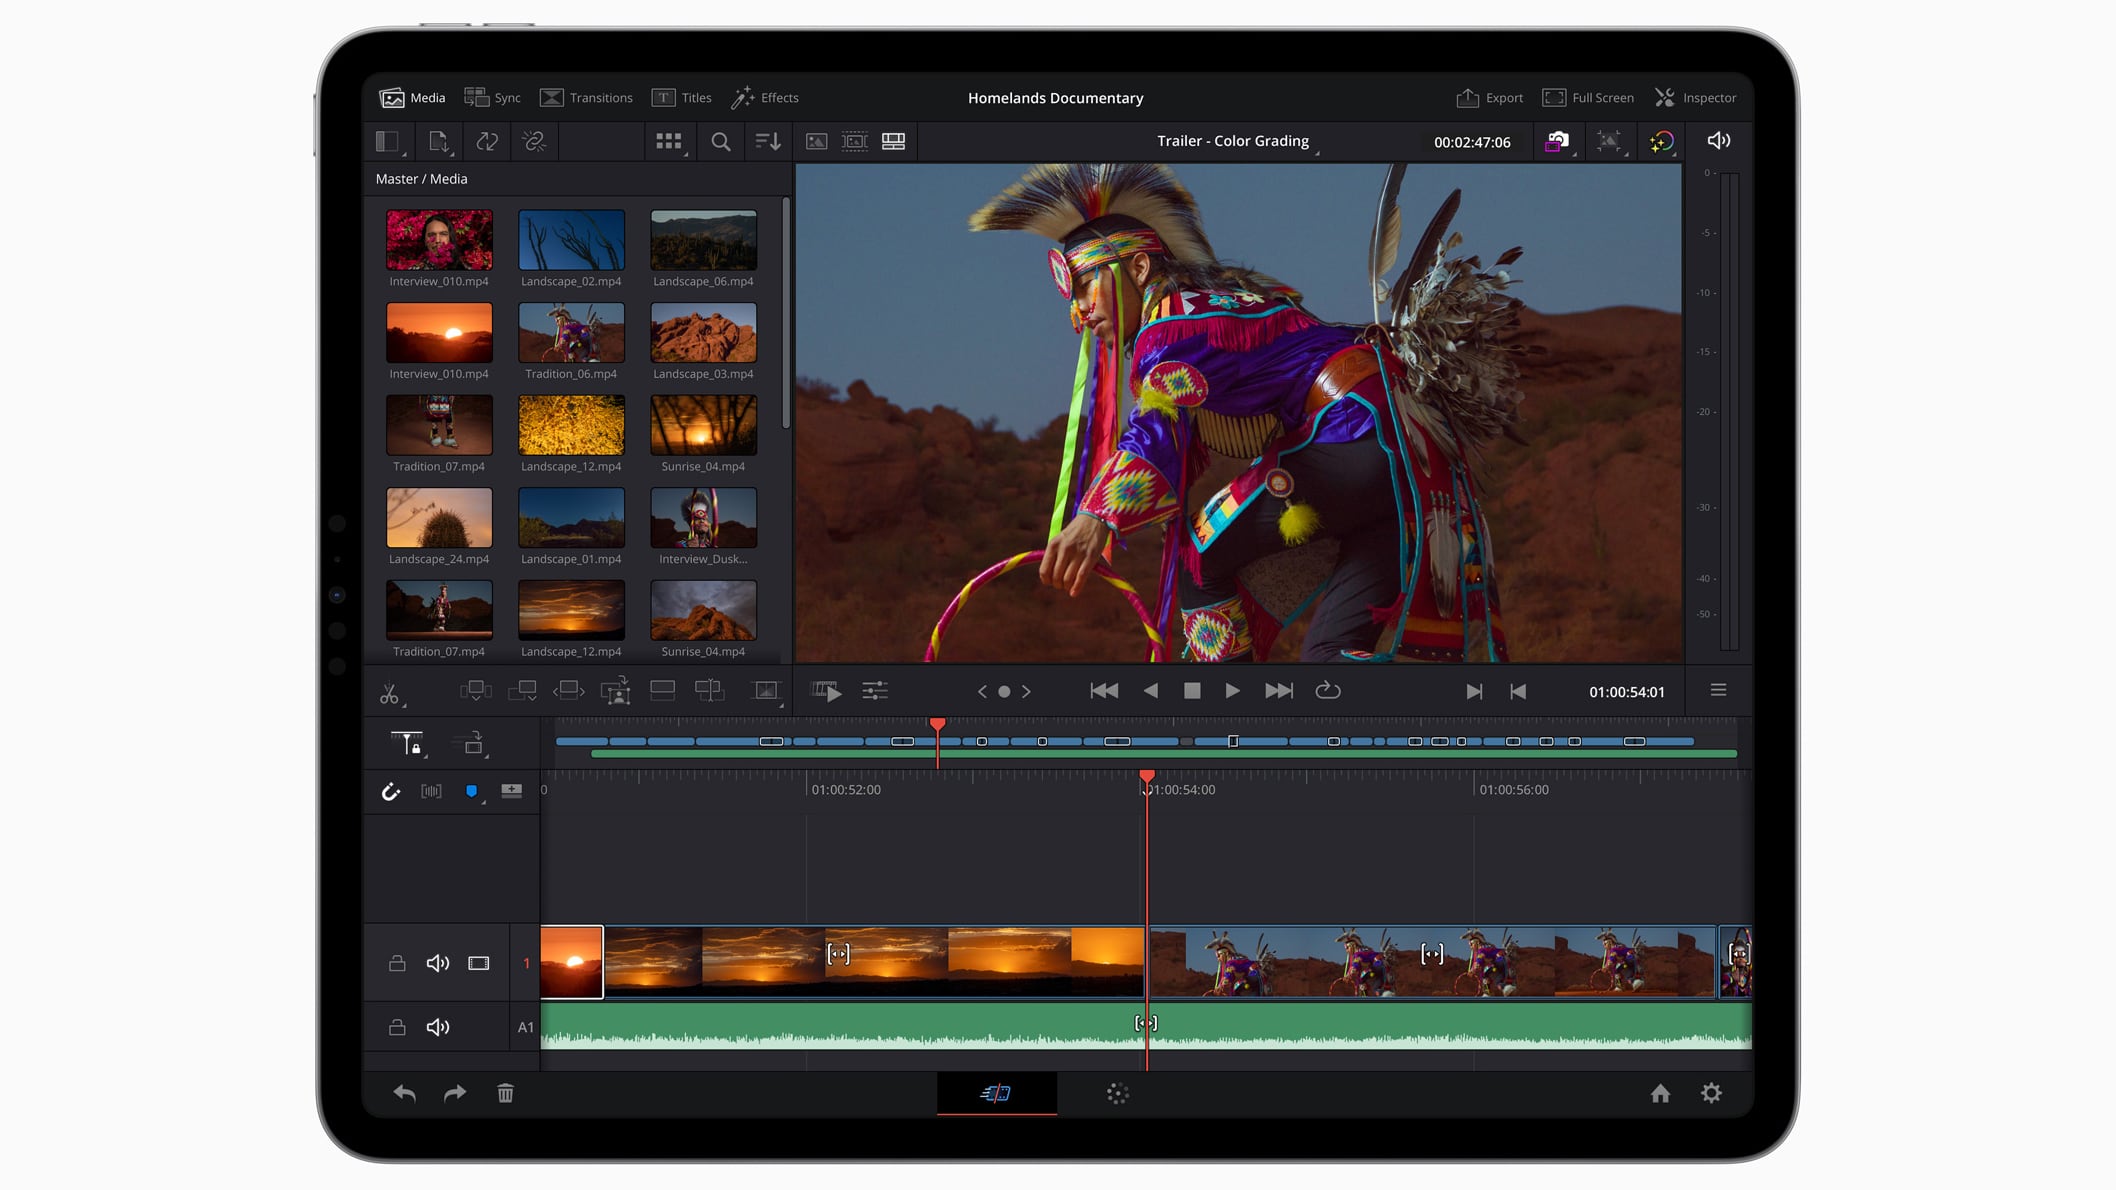 Using 12.9-inch M2 iPad Pro to edit the HomeLands documentary in DaVinci Resolve